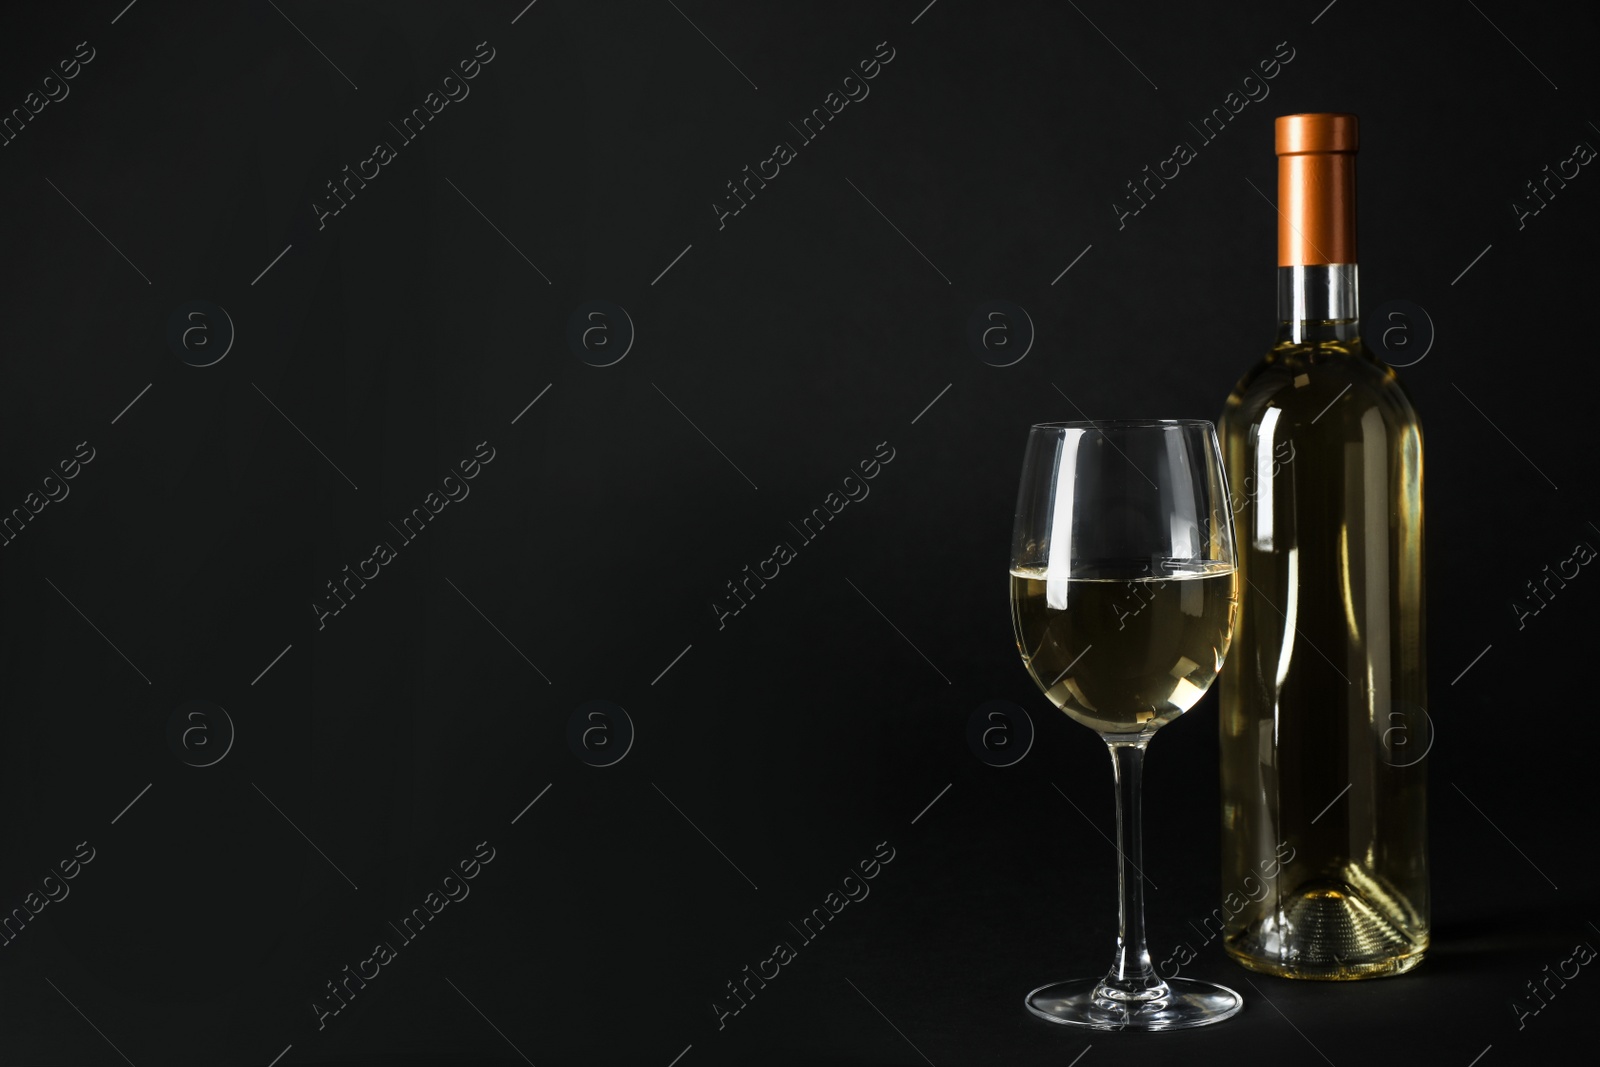 Photo of Bottle and glass of expensive white wine on dark background